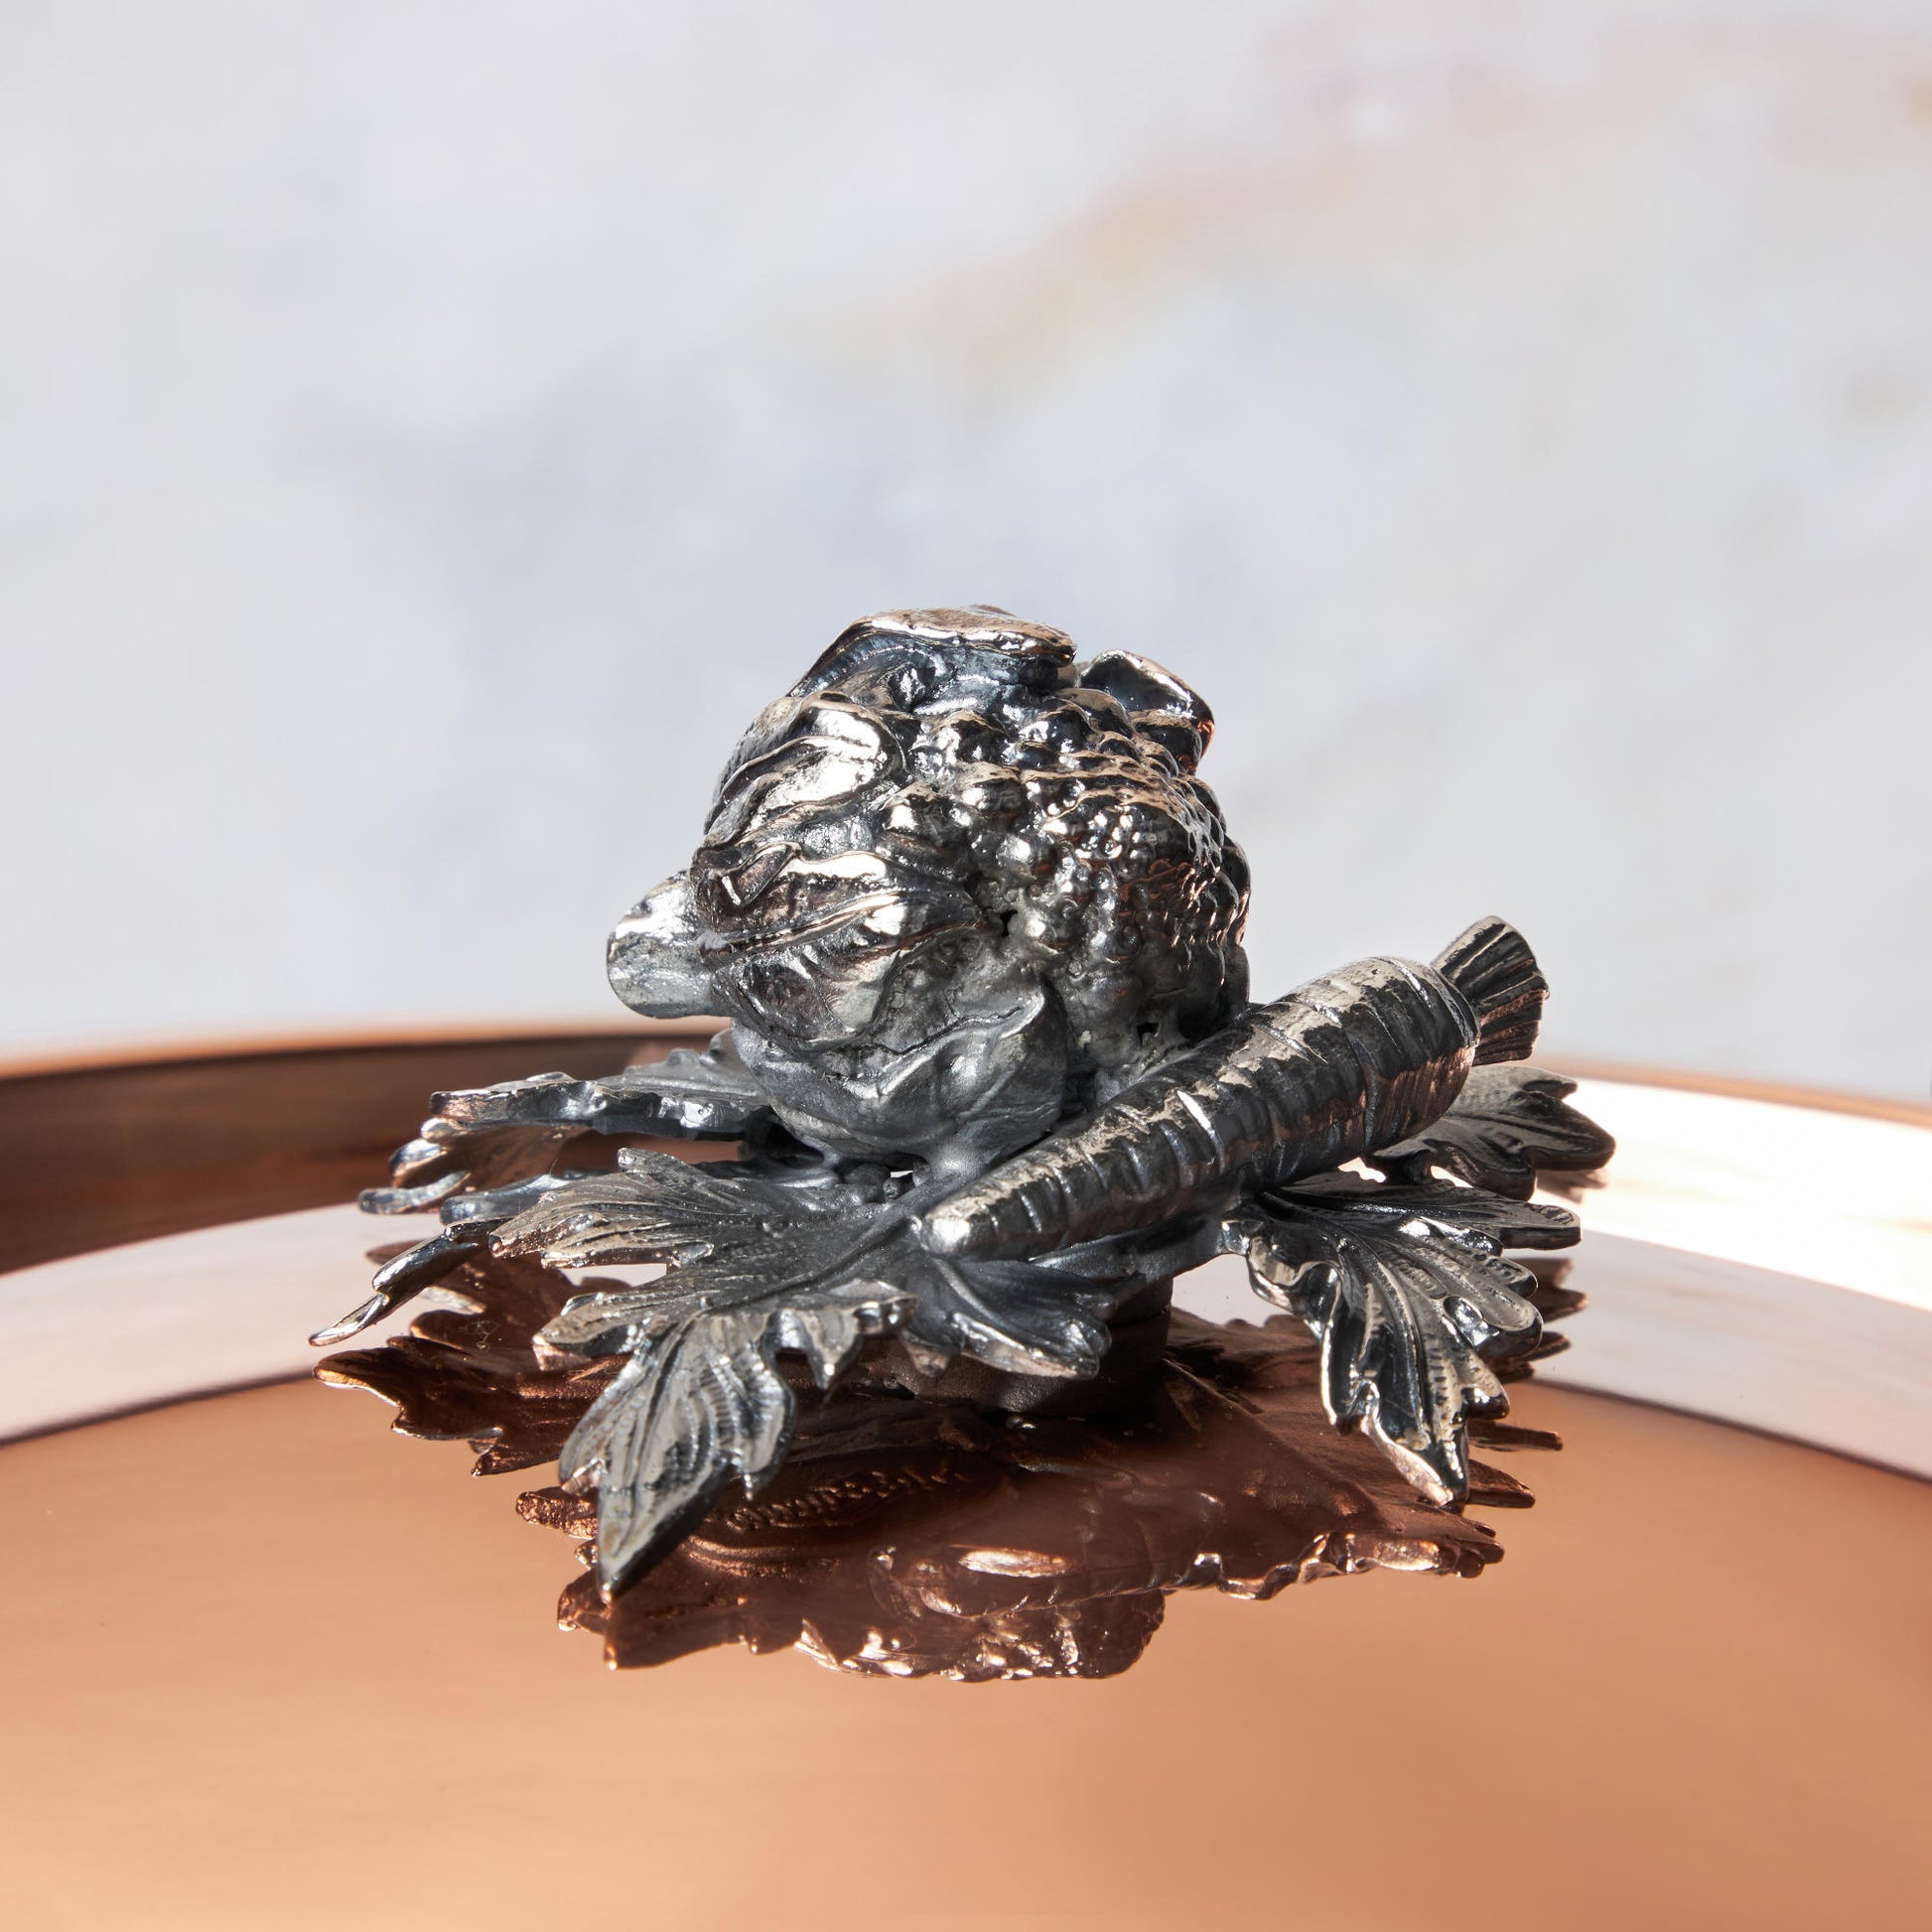 Decorated knob finial representing cauliflower and carrot, cast in solid bronze and silver plated, on Opus Cupra clad copper lid by Ruffoni